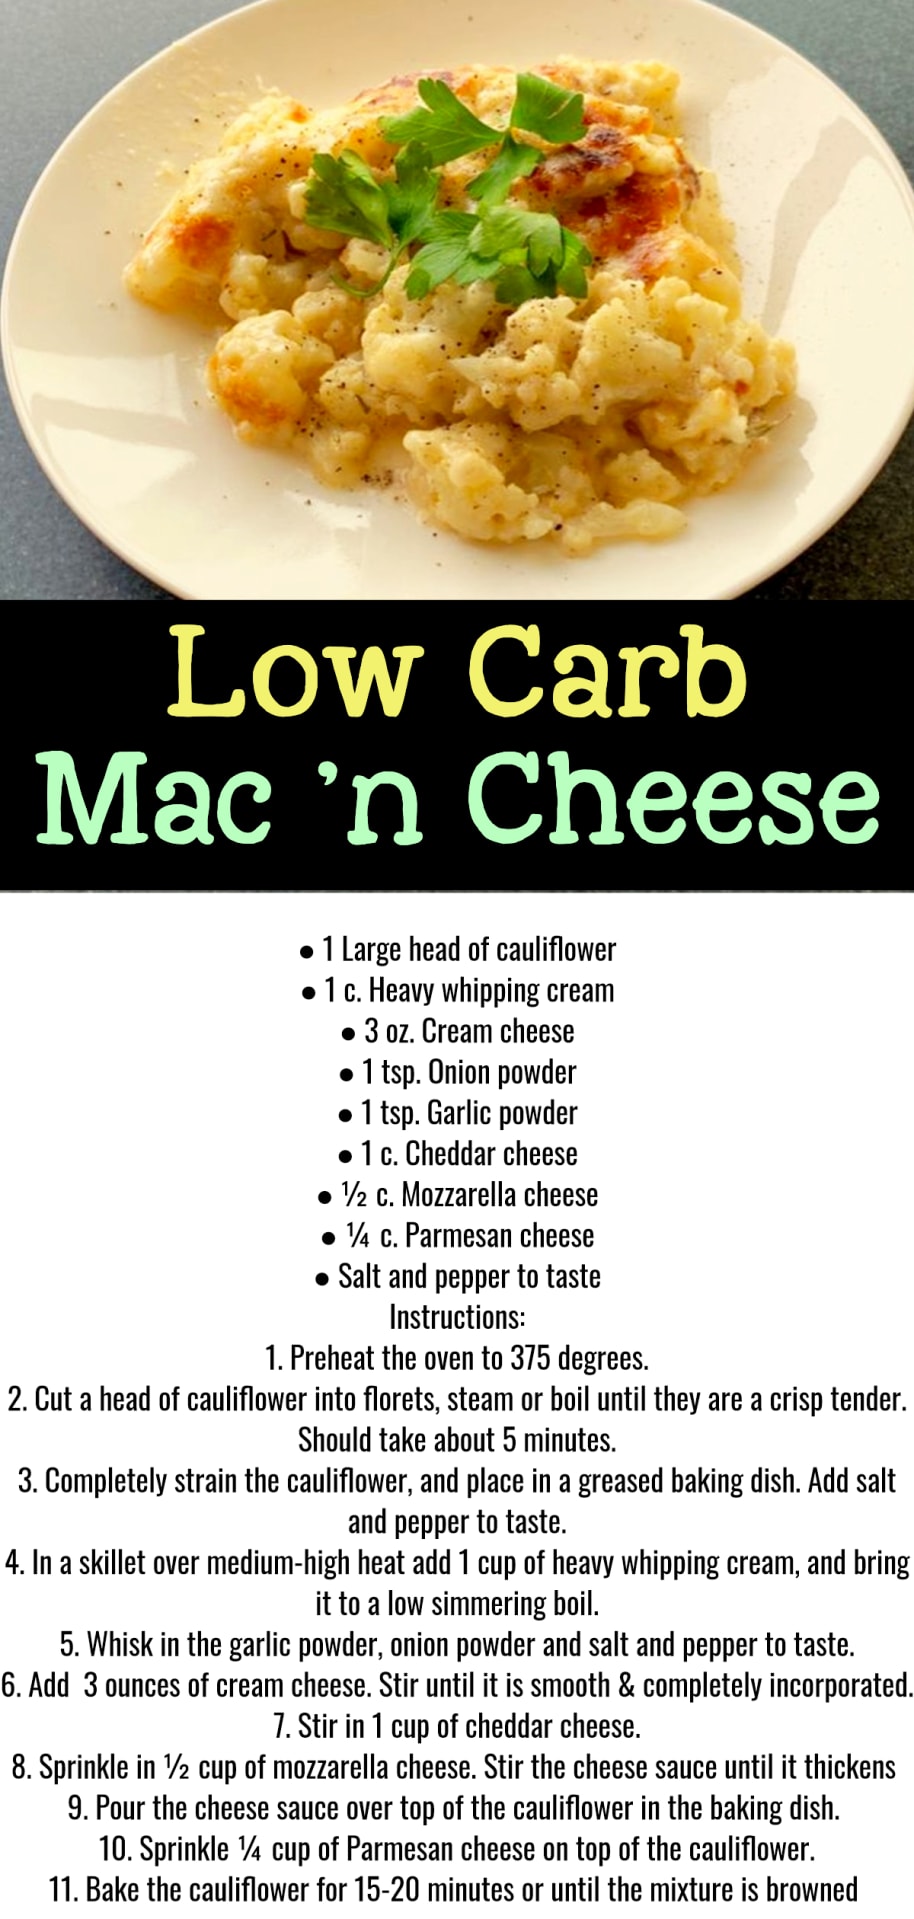 Low carb macaroni and cheese recipe - easy healthy low carb keto mac n cheese with cauliflower - easy low carb recipes